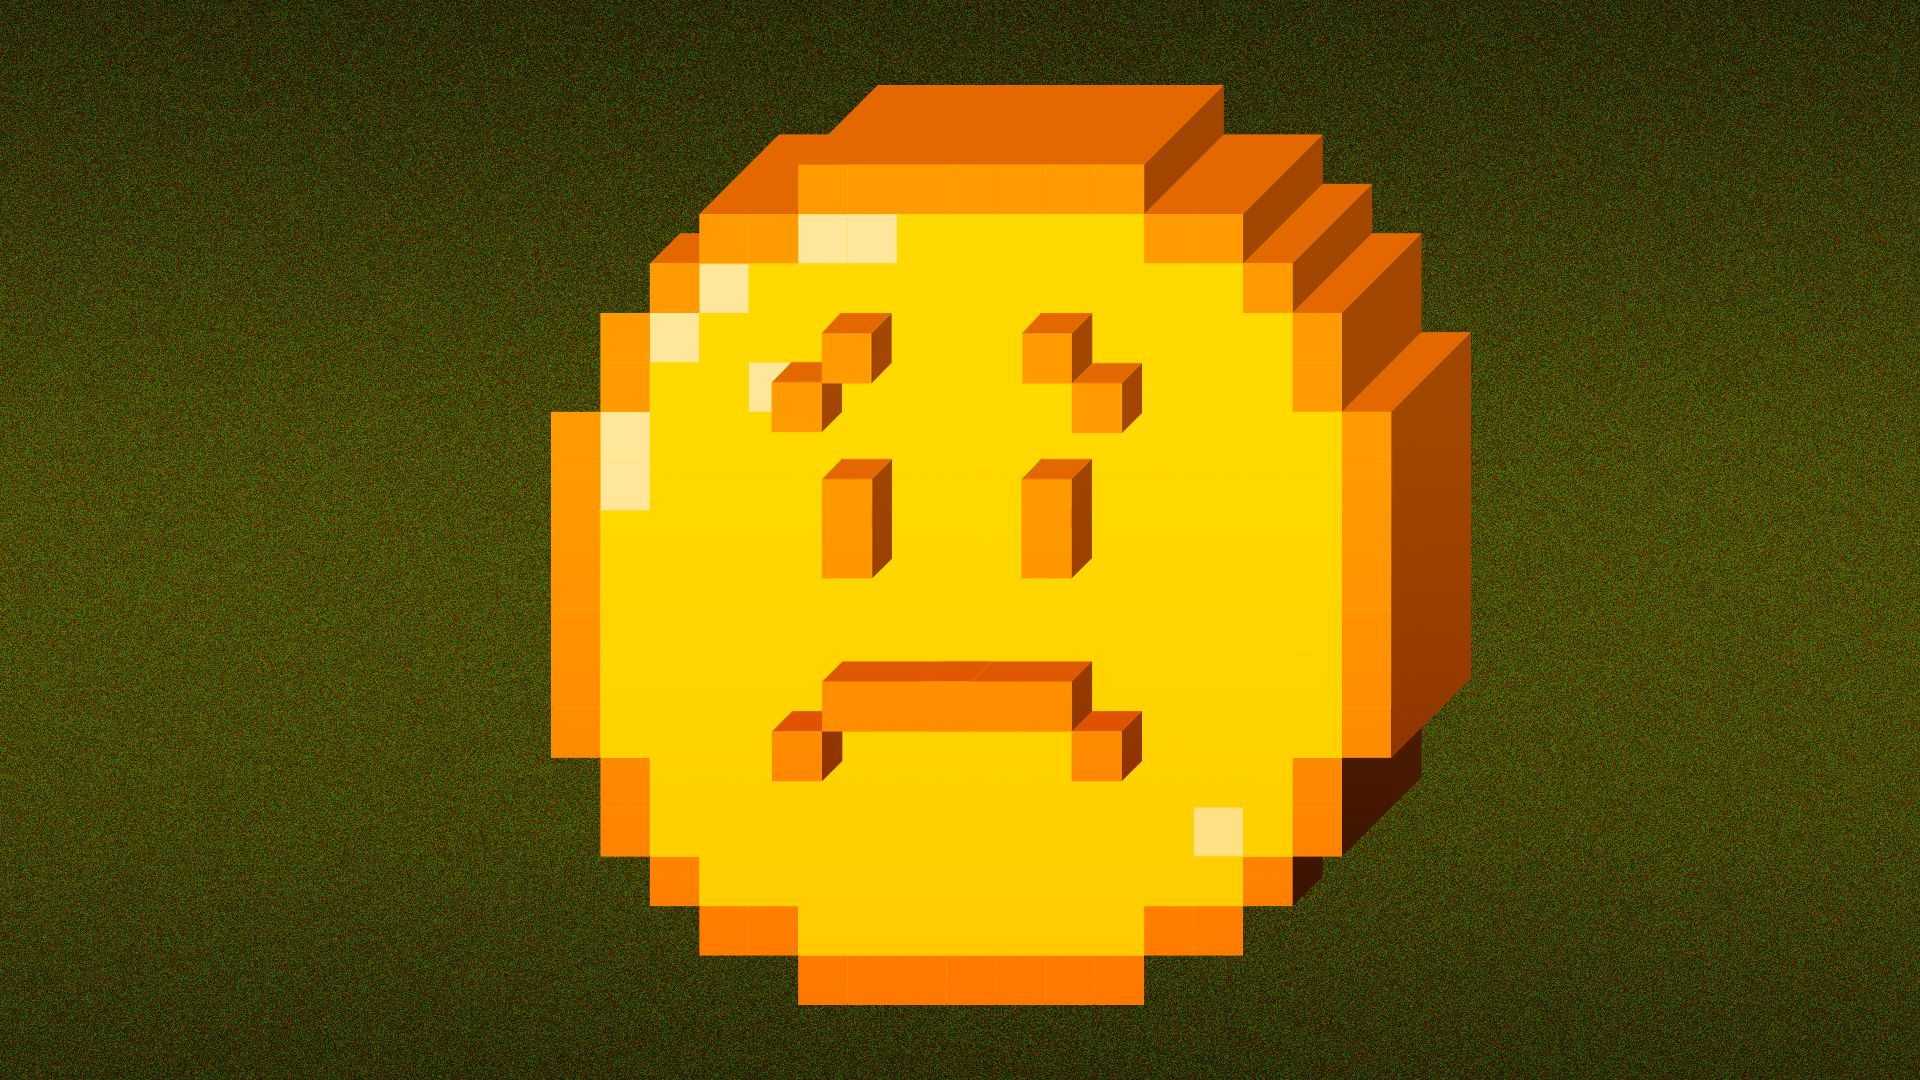 Illustration of a sad face on a digital, pixelated coin